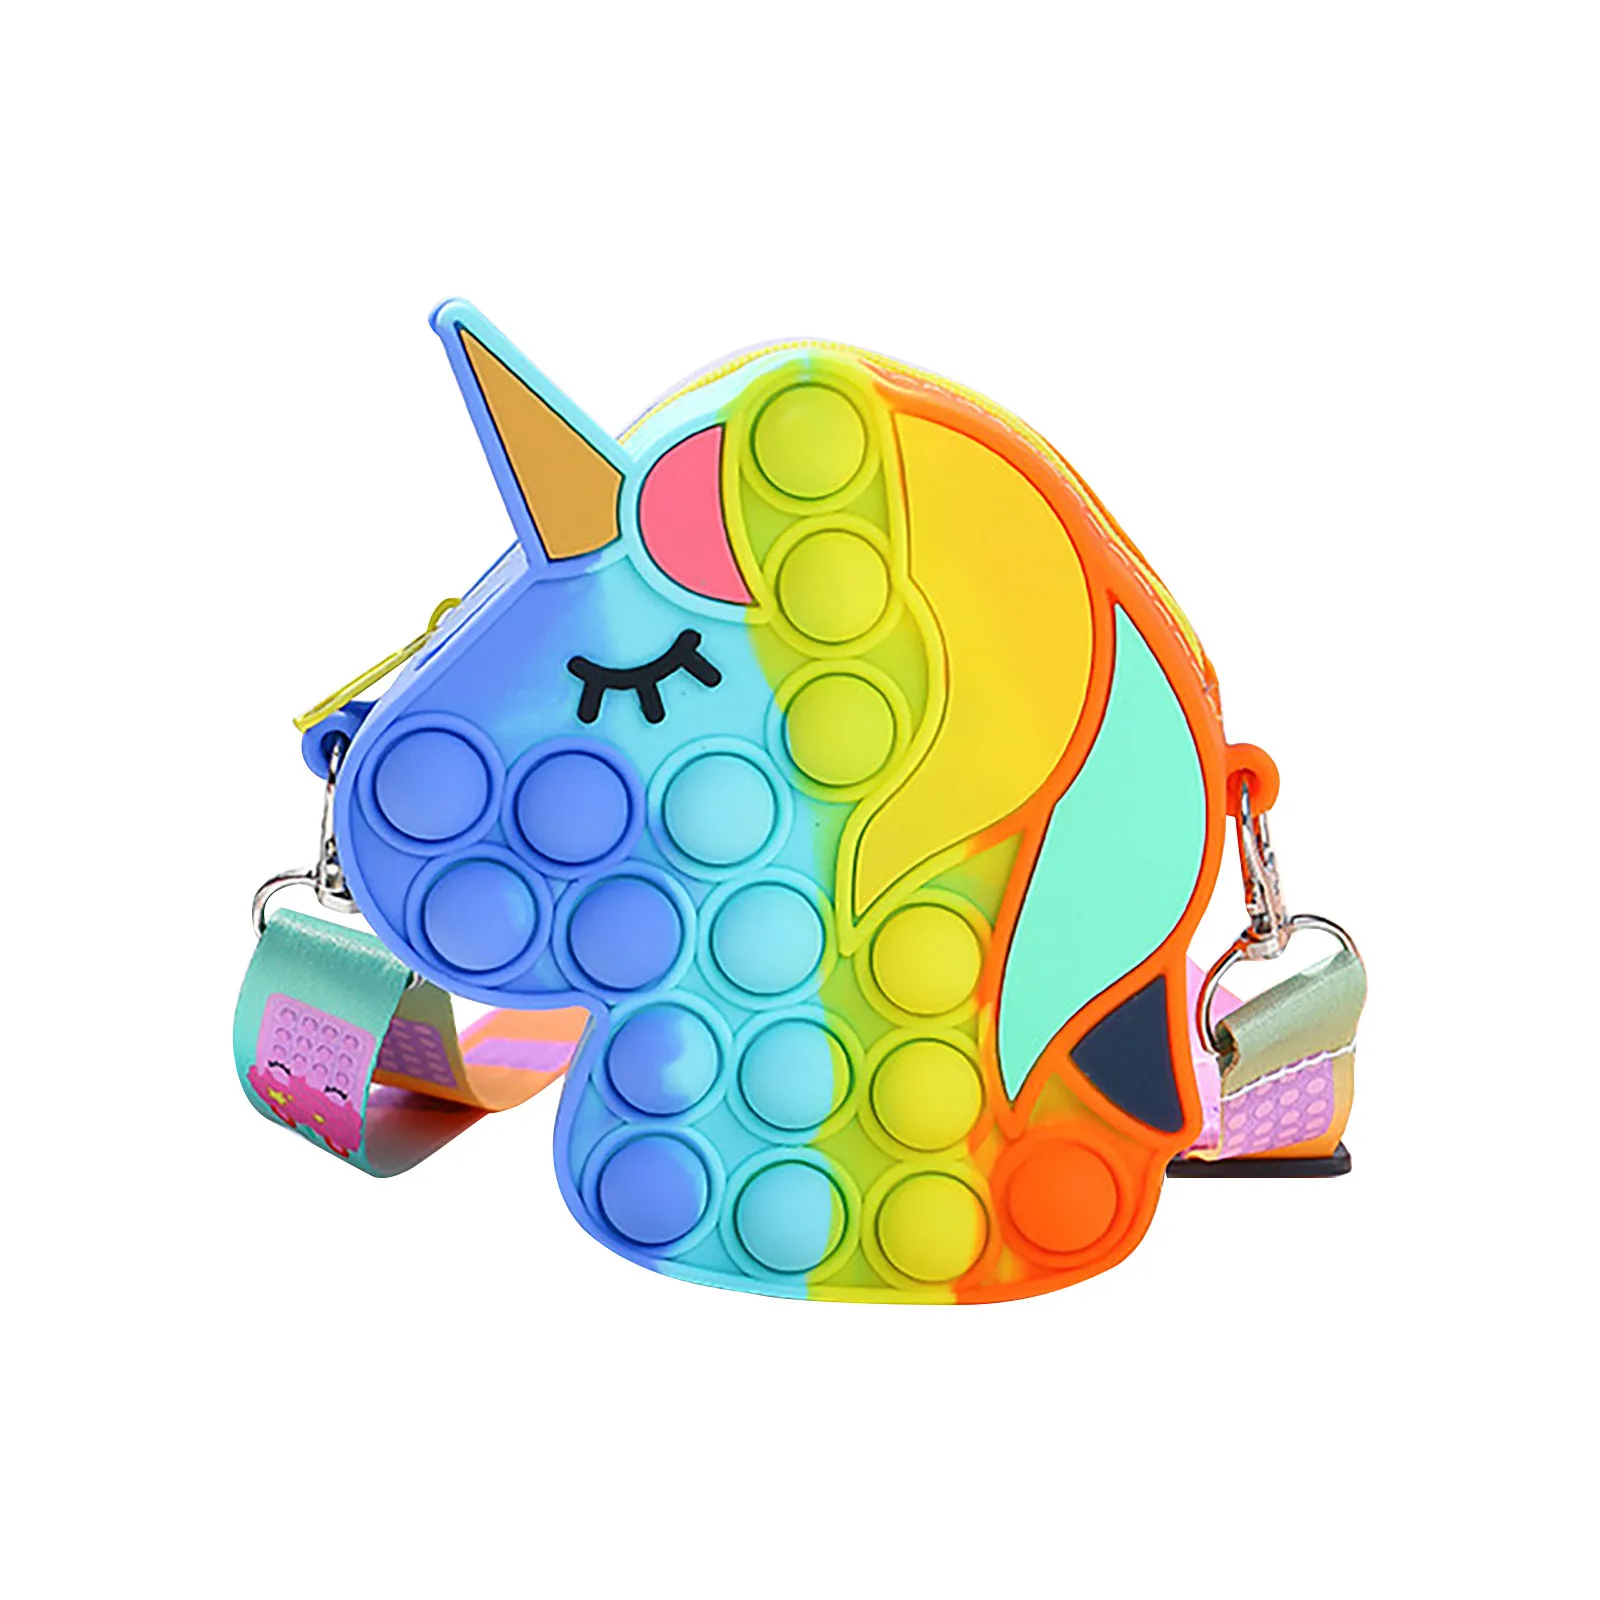 stress squeeze toy Rainbow Poppet Push Bubbles Toy Unicorn Kawaii Coin Purse Children Wallet Ladies Bag Silica Gel Simple Dimple Fidget Toy dna stress ball Squeeze Toys